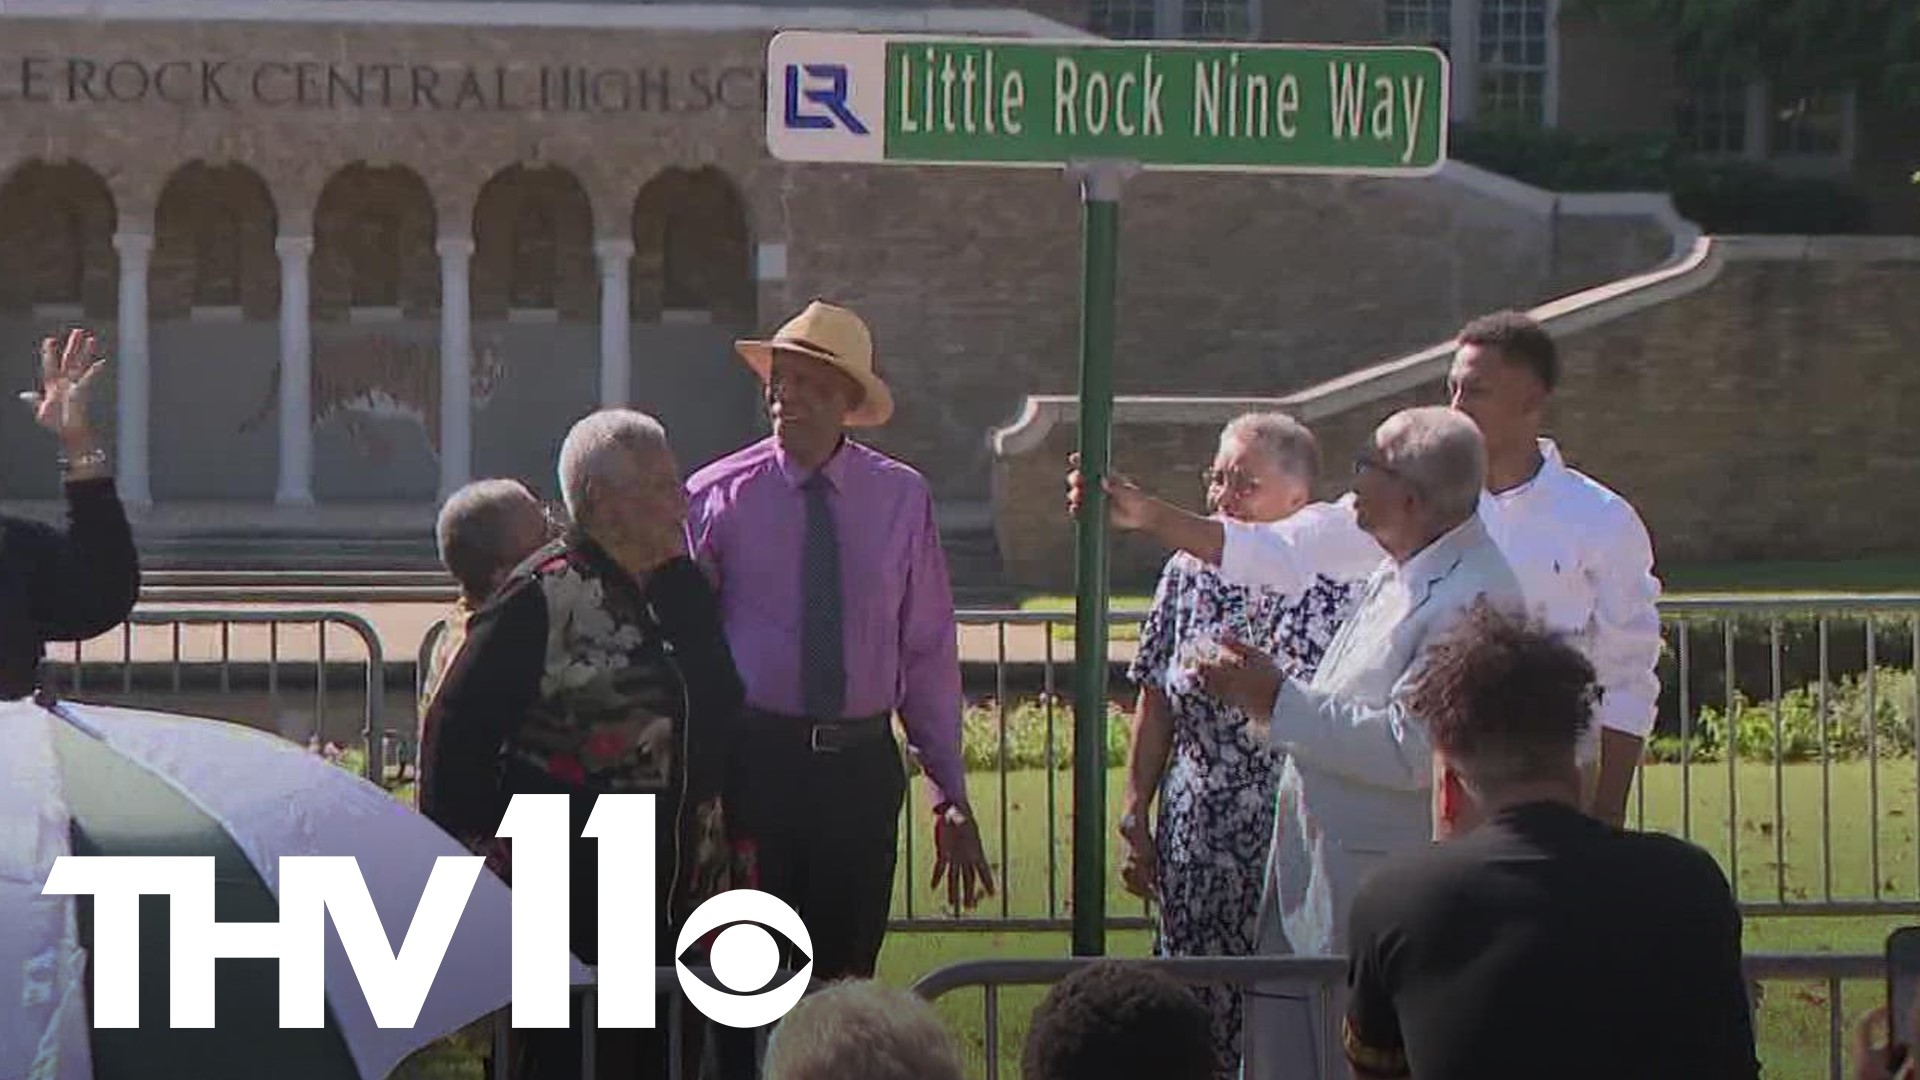 Members of the Little Rock Nine gathered outside of the Central High for the unveiling of Little Rock Nine Way on the 65th anniversary of the school's integration.